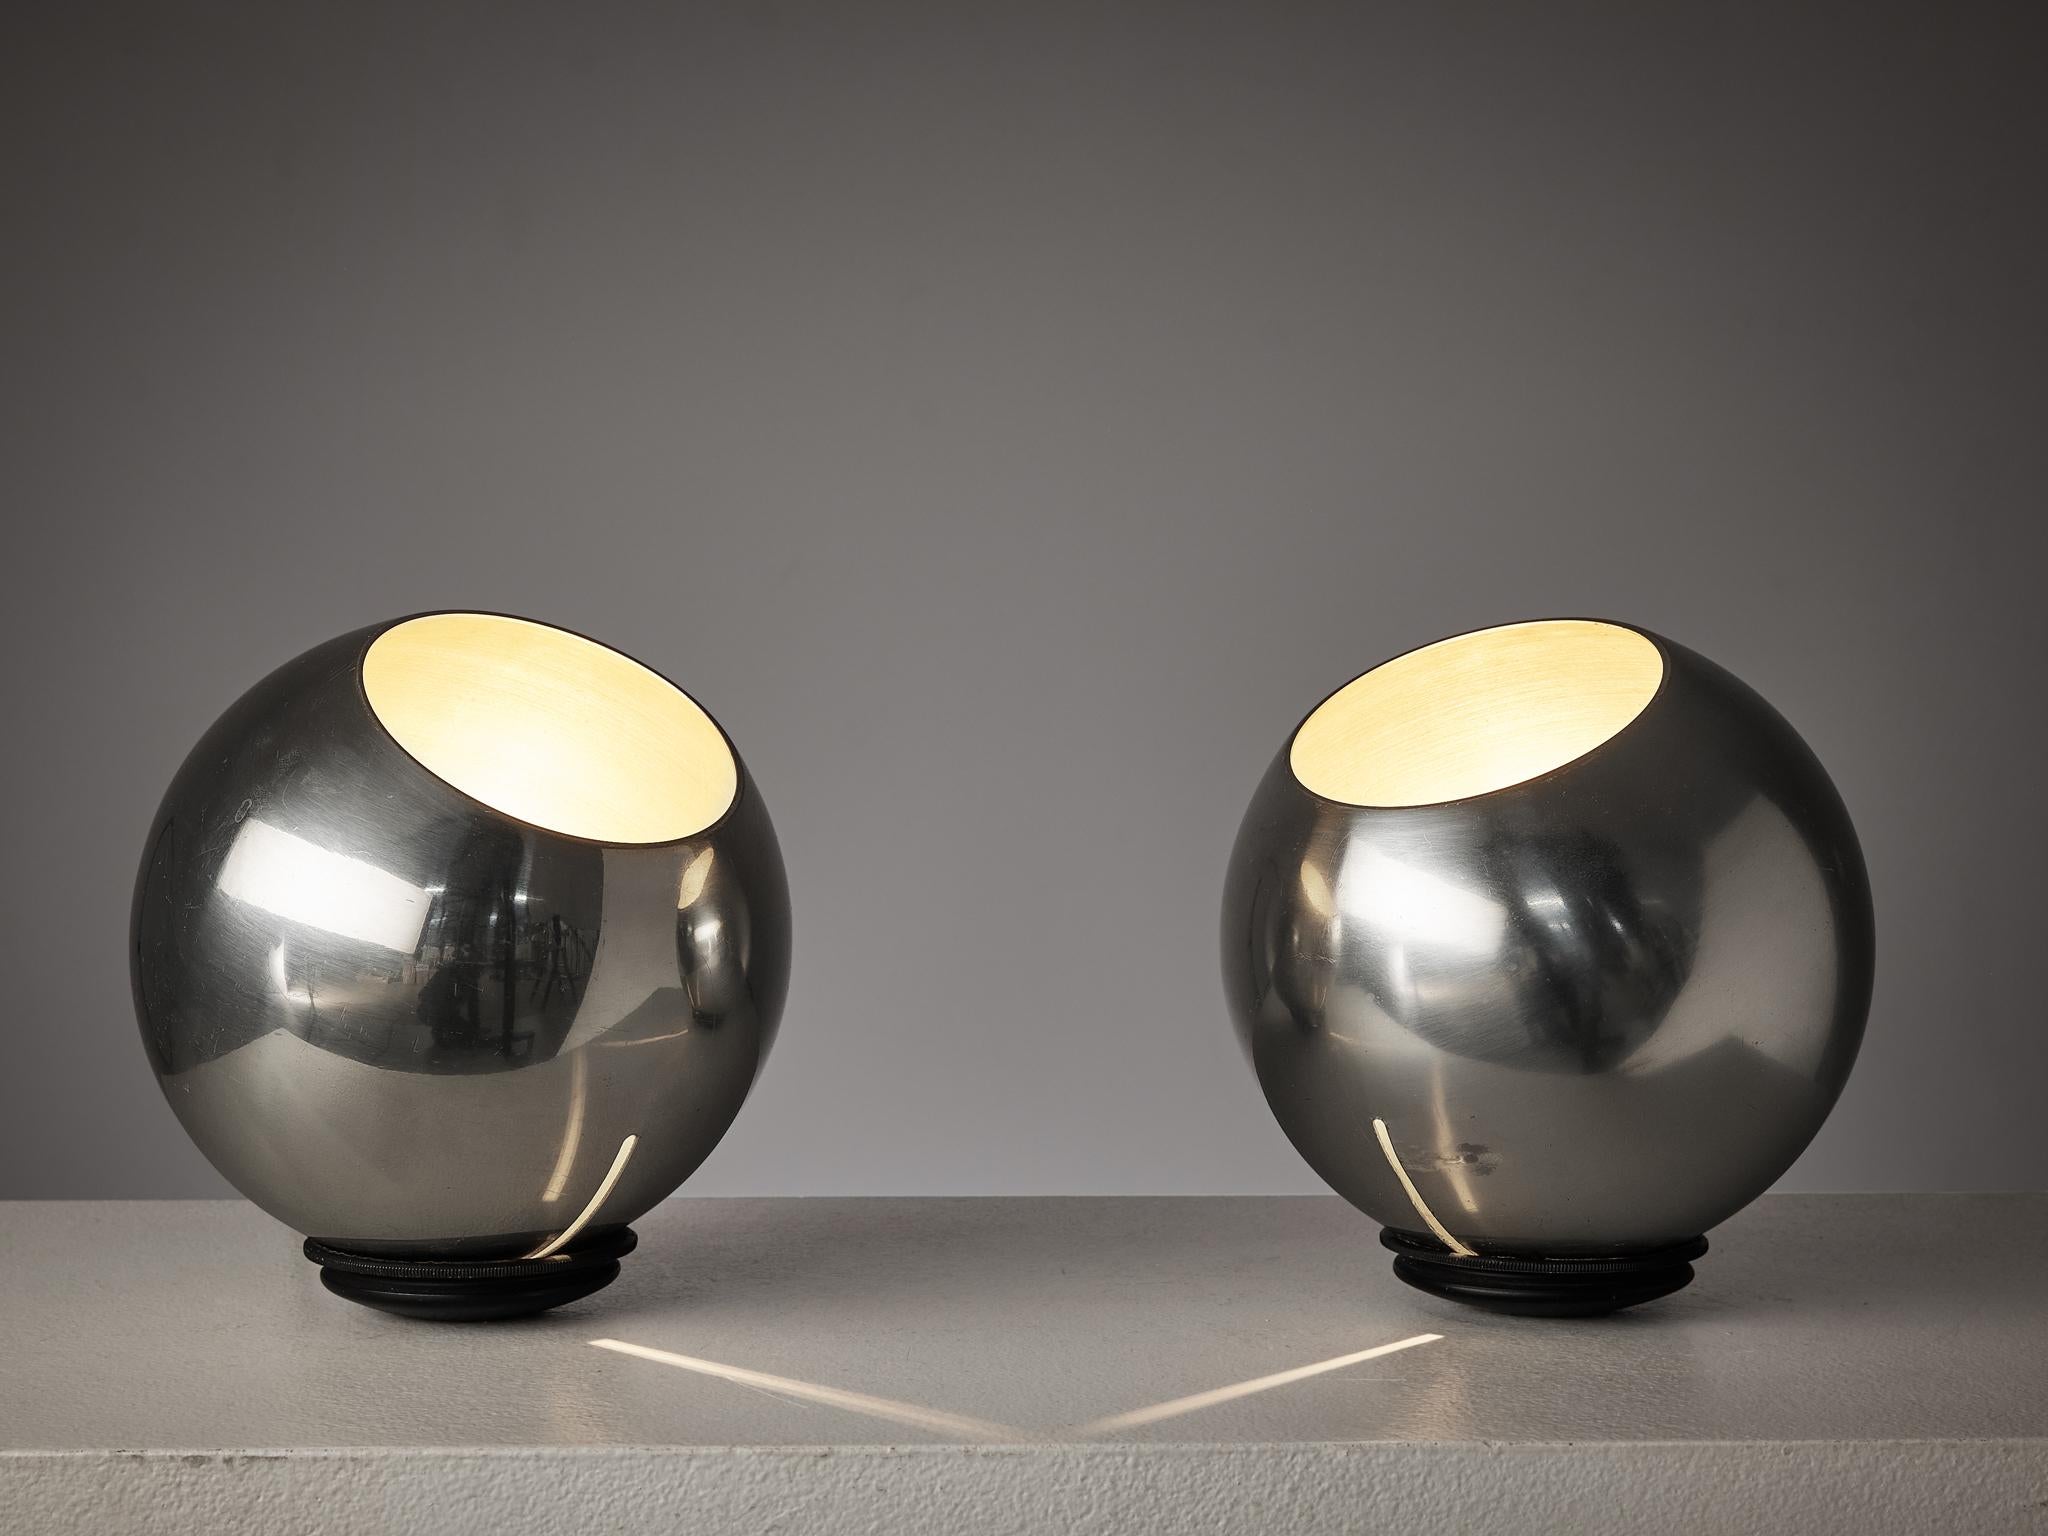 Gino Sarfatti for Arteluce, pair of table or floor lamps, model '586', aluminum, wire, Italy, 1962.

Pair of stunning aluminum lamps designed by Italian designer Gino Sarfatti for Arteluce. The round spheres are placed on a flat aluminum base and